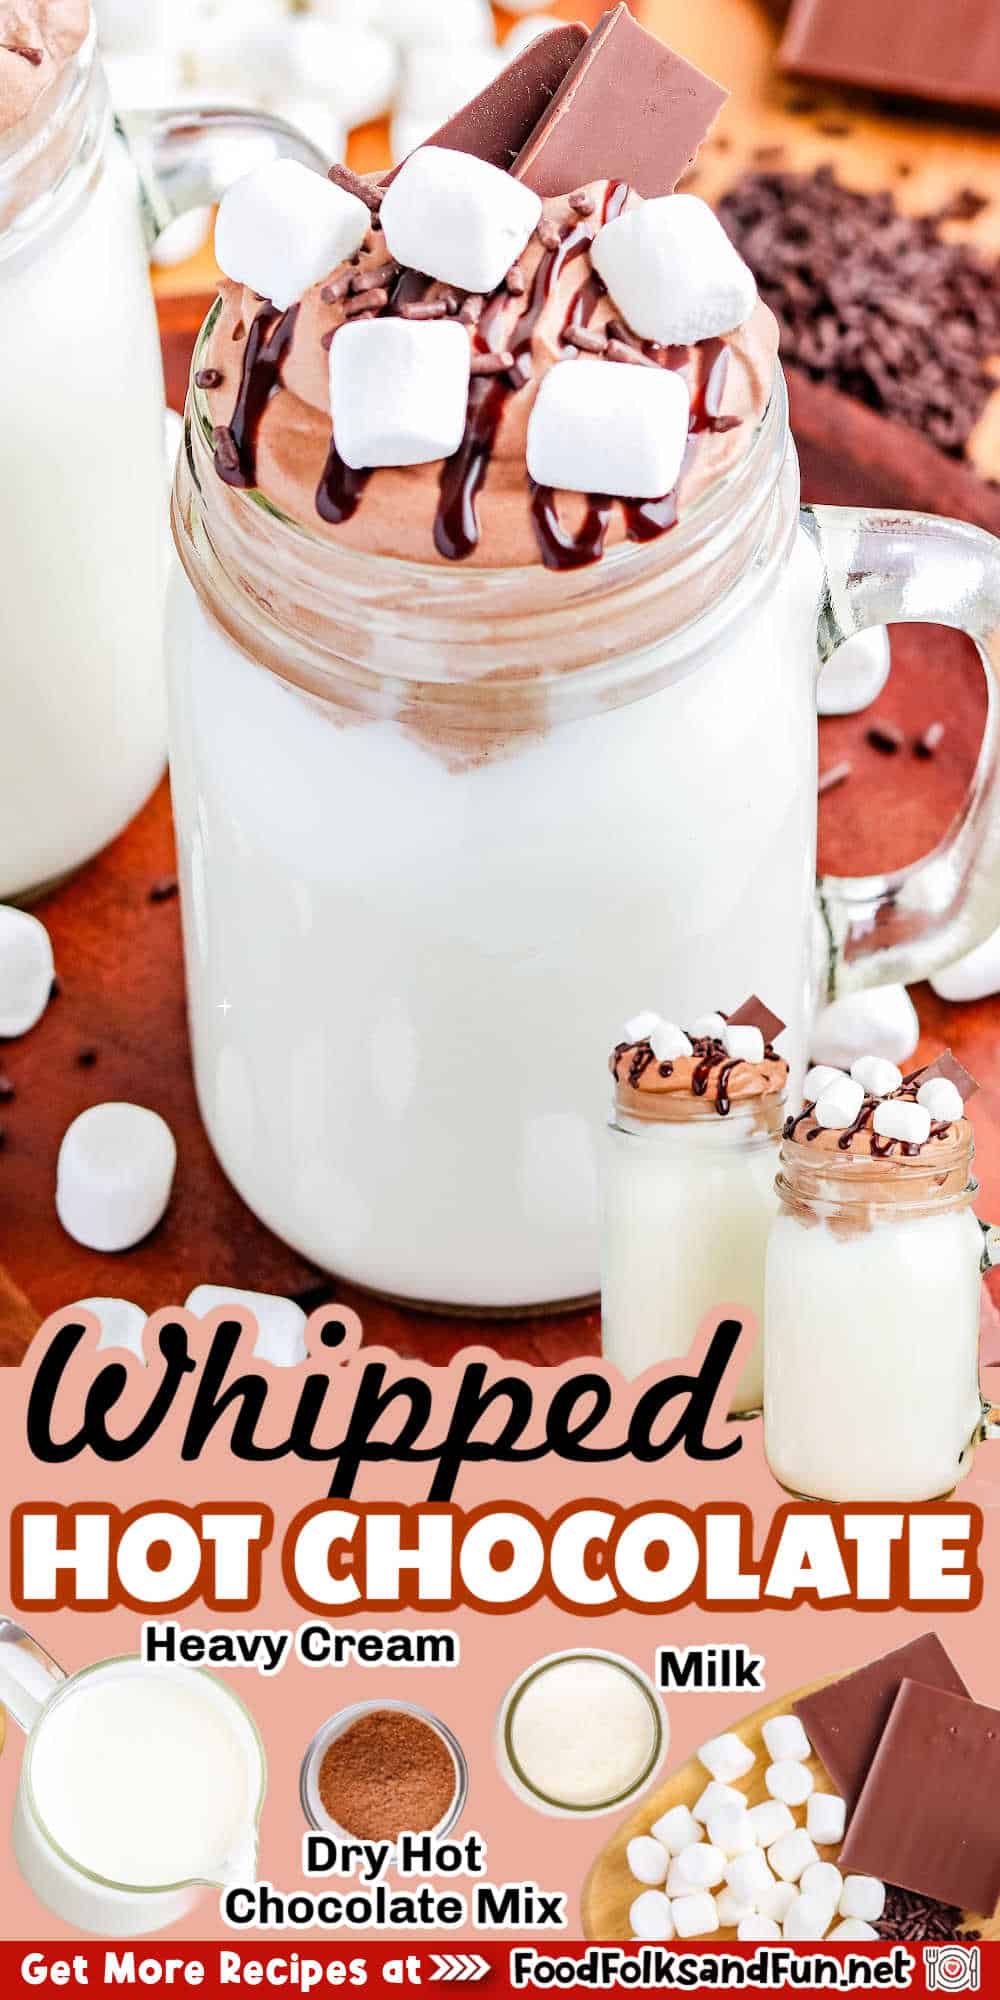 Hot chocolate and whipped cream are a classic combination for a reason. This 5-minute whipped hot chocolate recipe takes it to the next level, creating a creamy, decadent, irresistible treat. via @foodfolksandfun